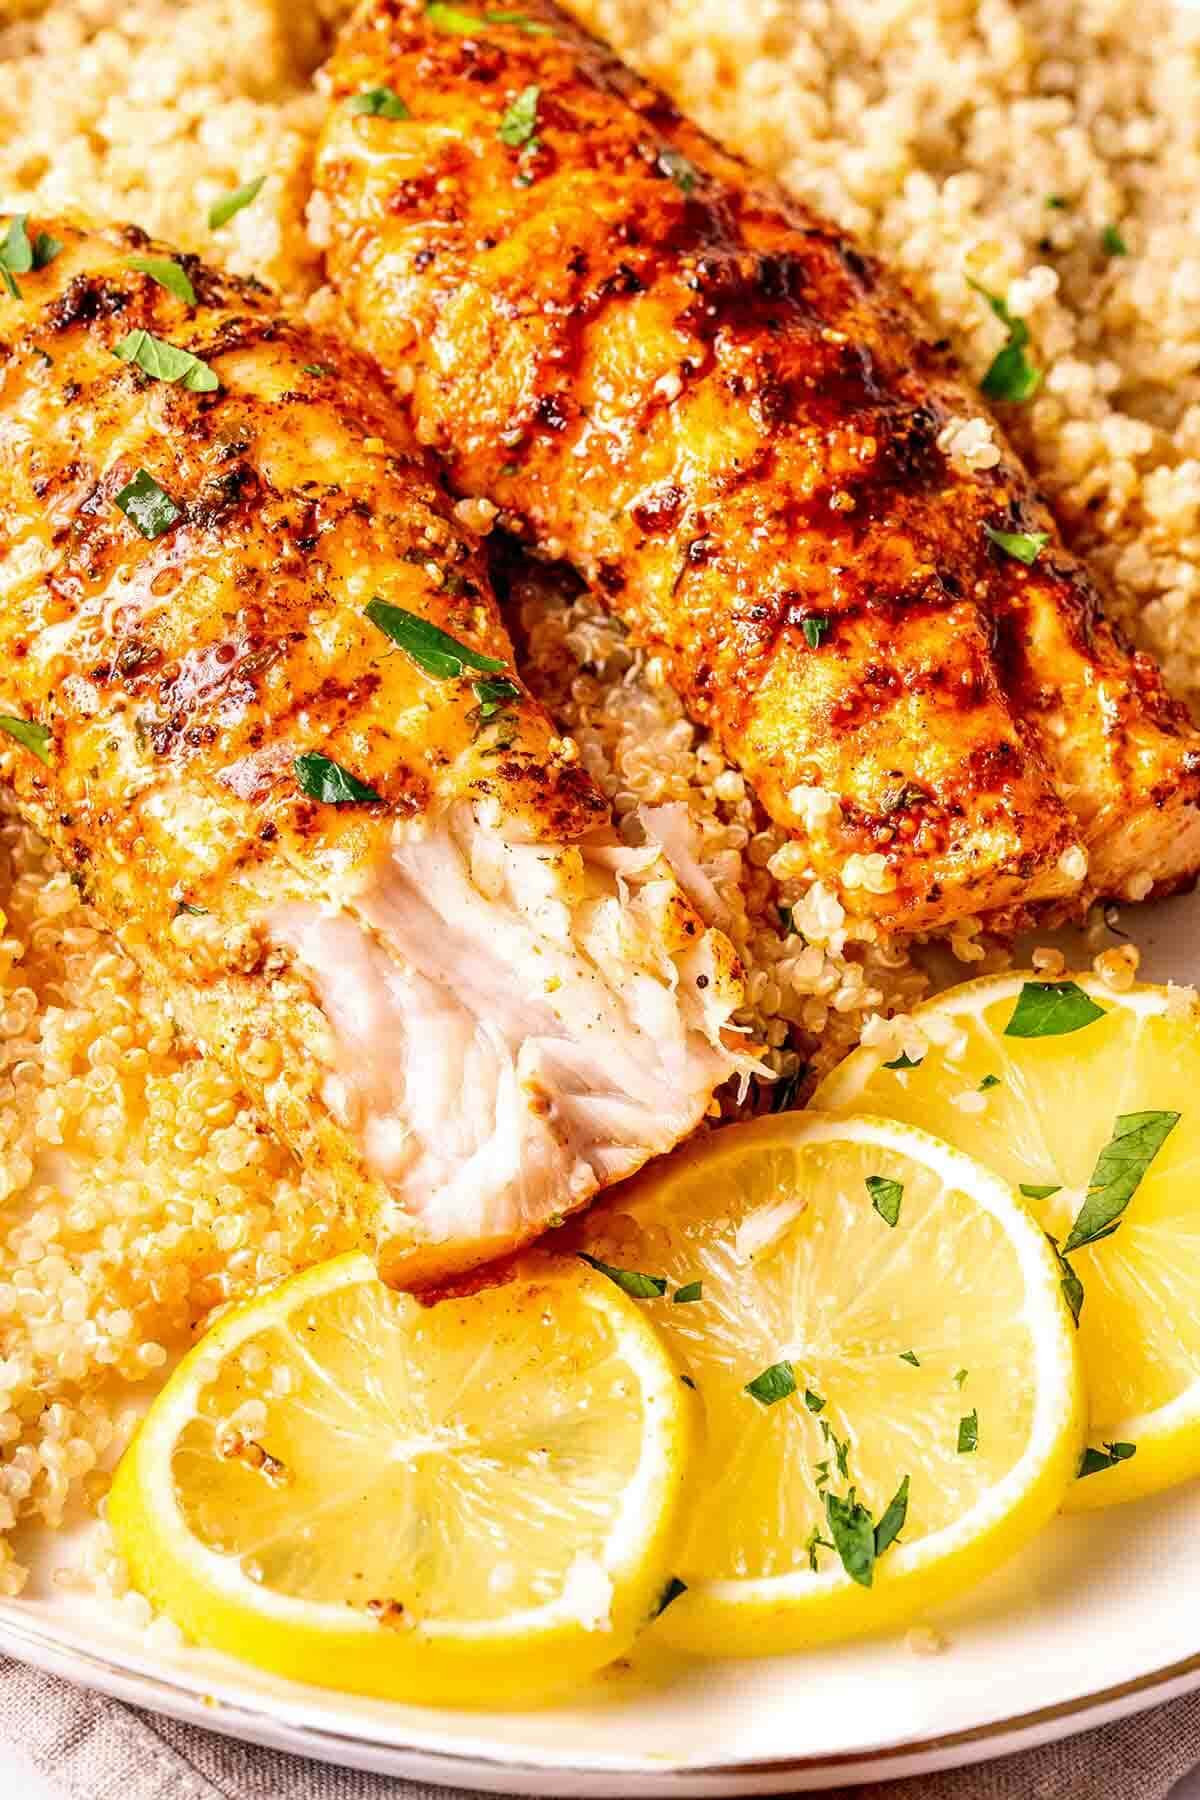 seared orange roughy on a plate with couscous and lemon.